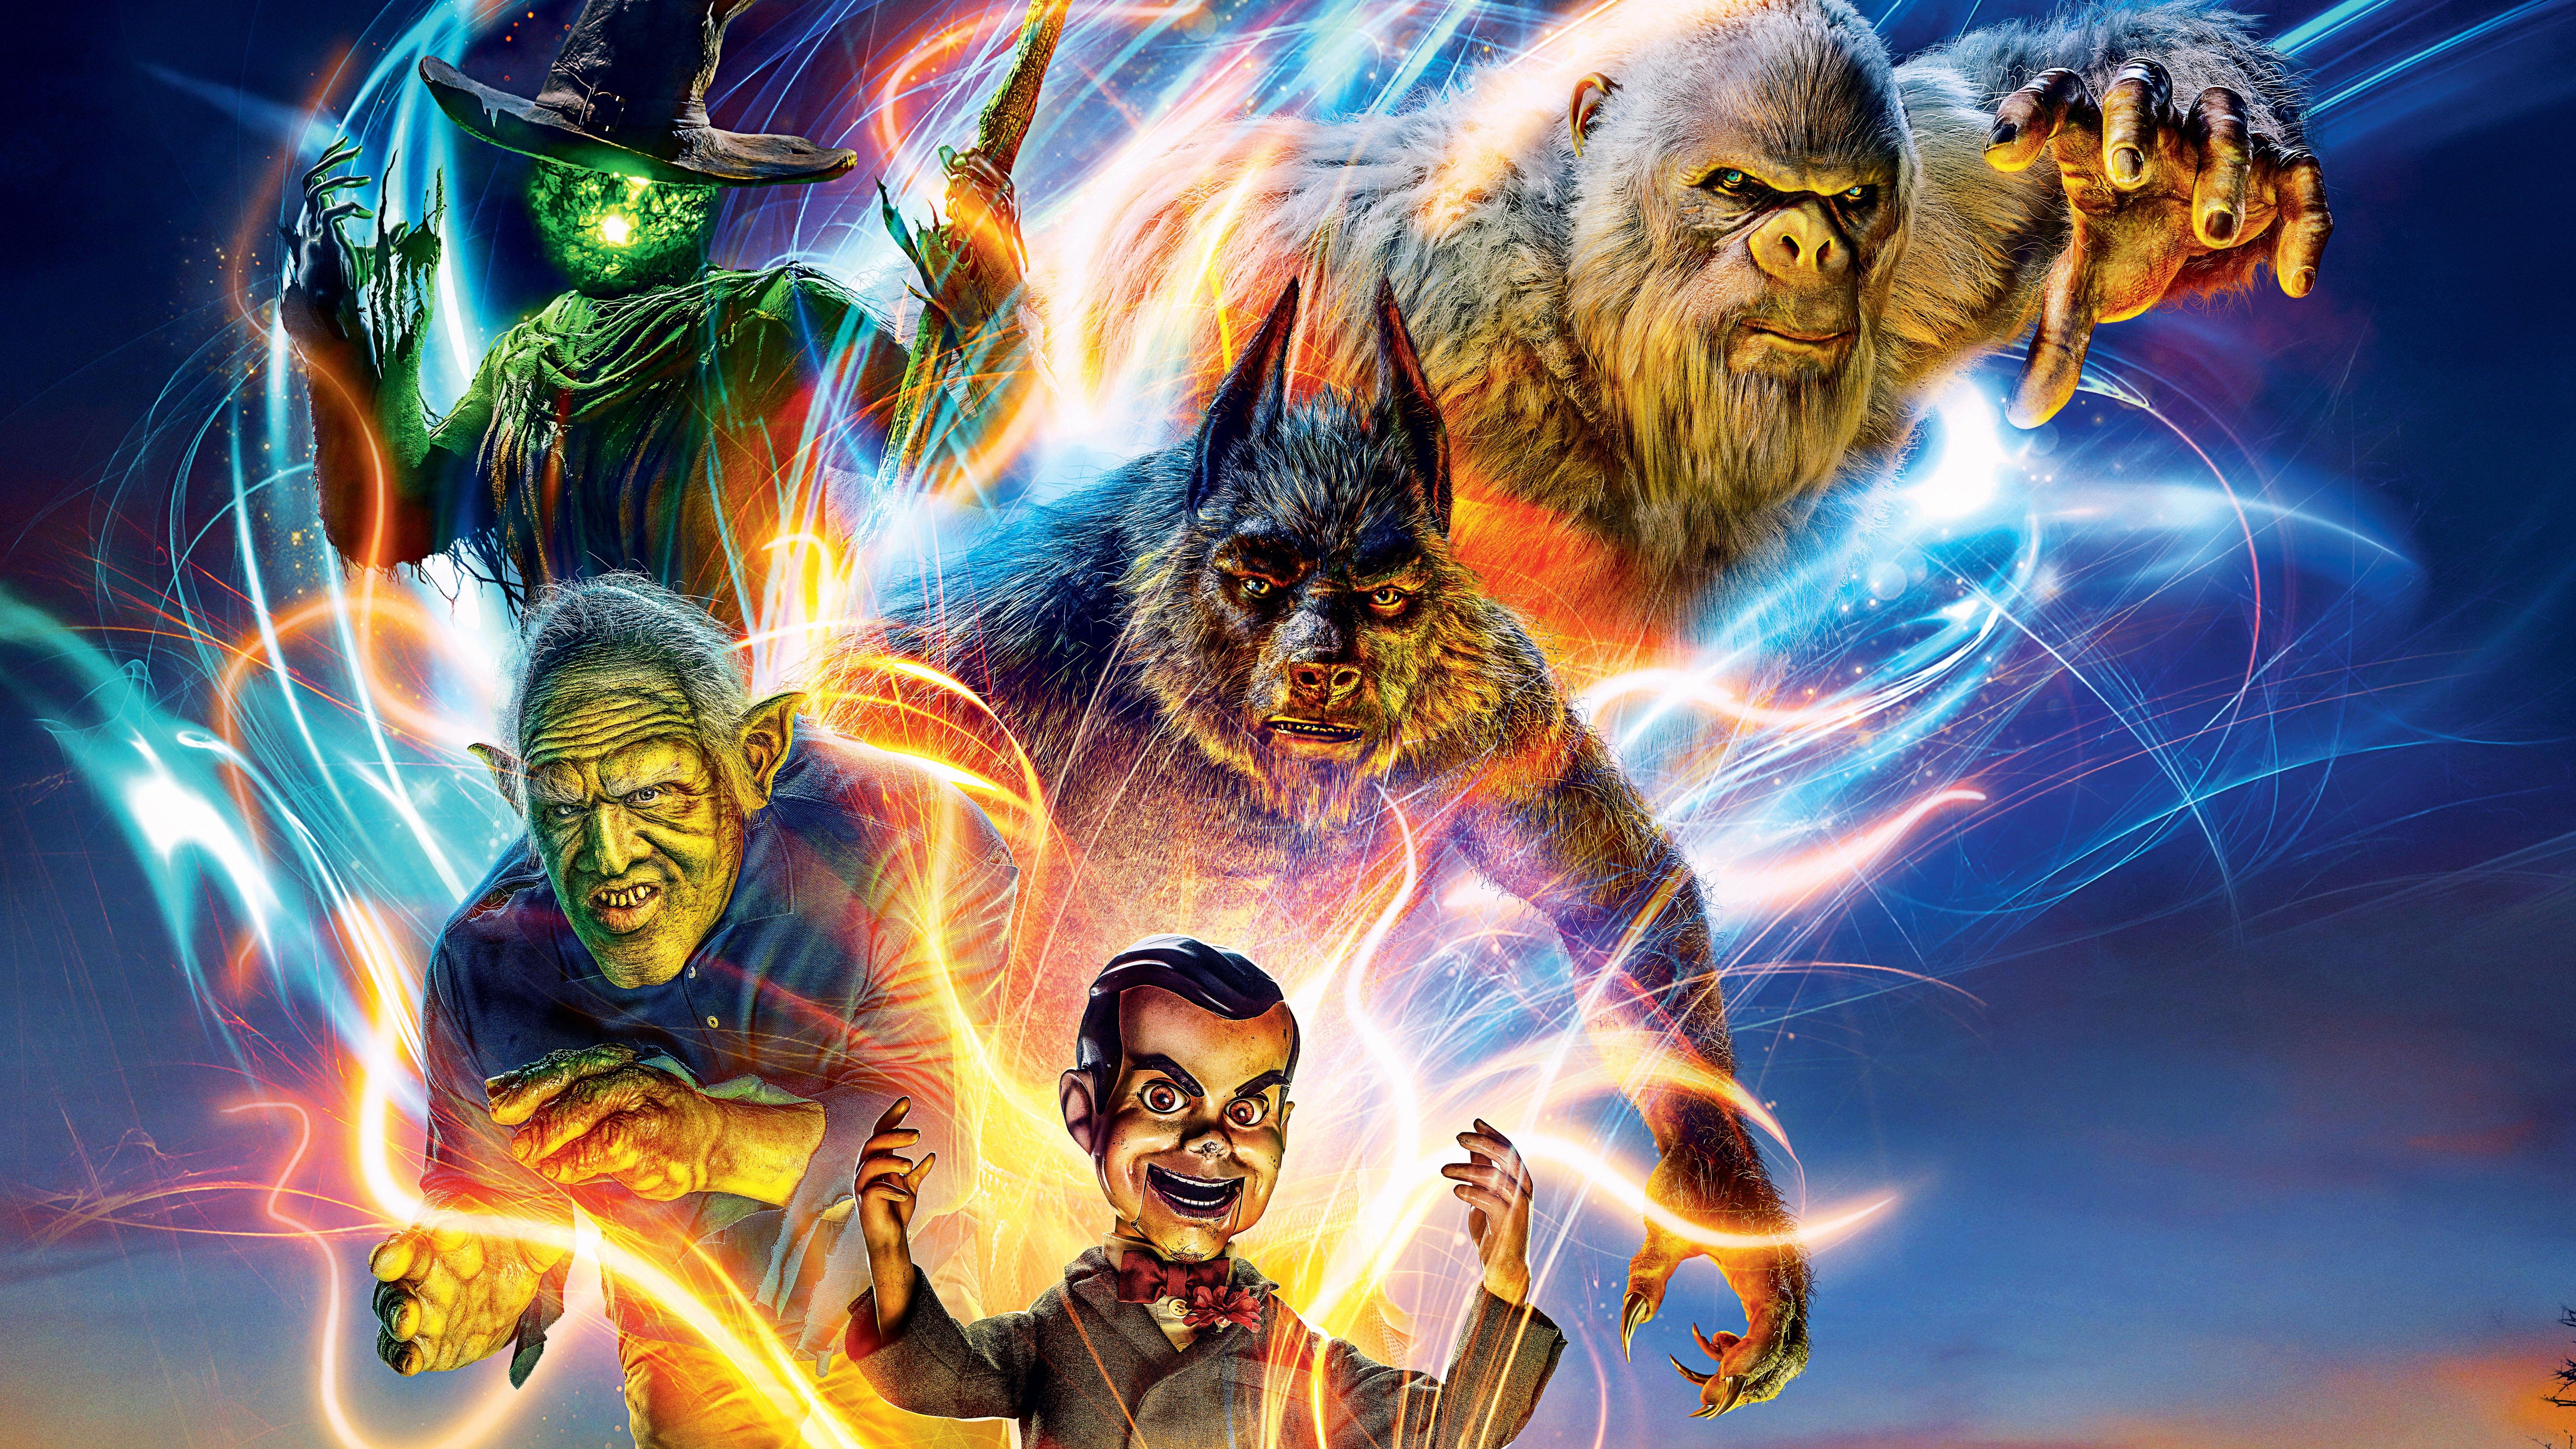 Goosebumps Wolf wallpaper by cougars2019  Download on ZEDGE  0f74